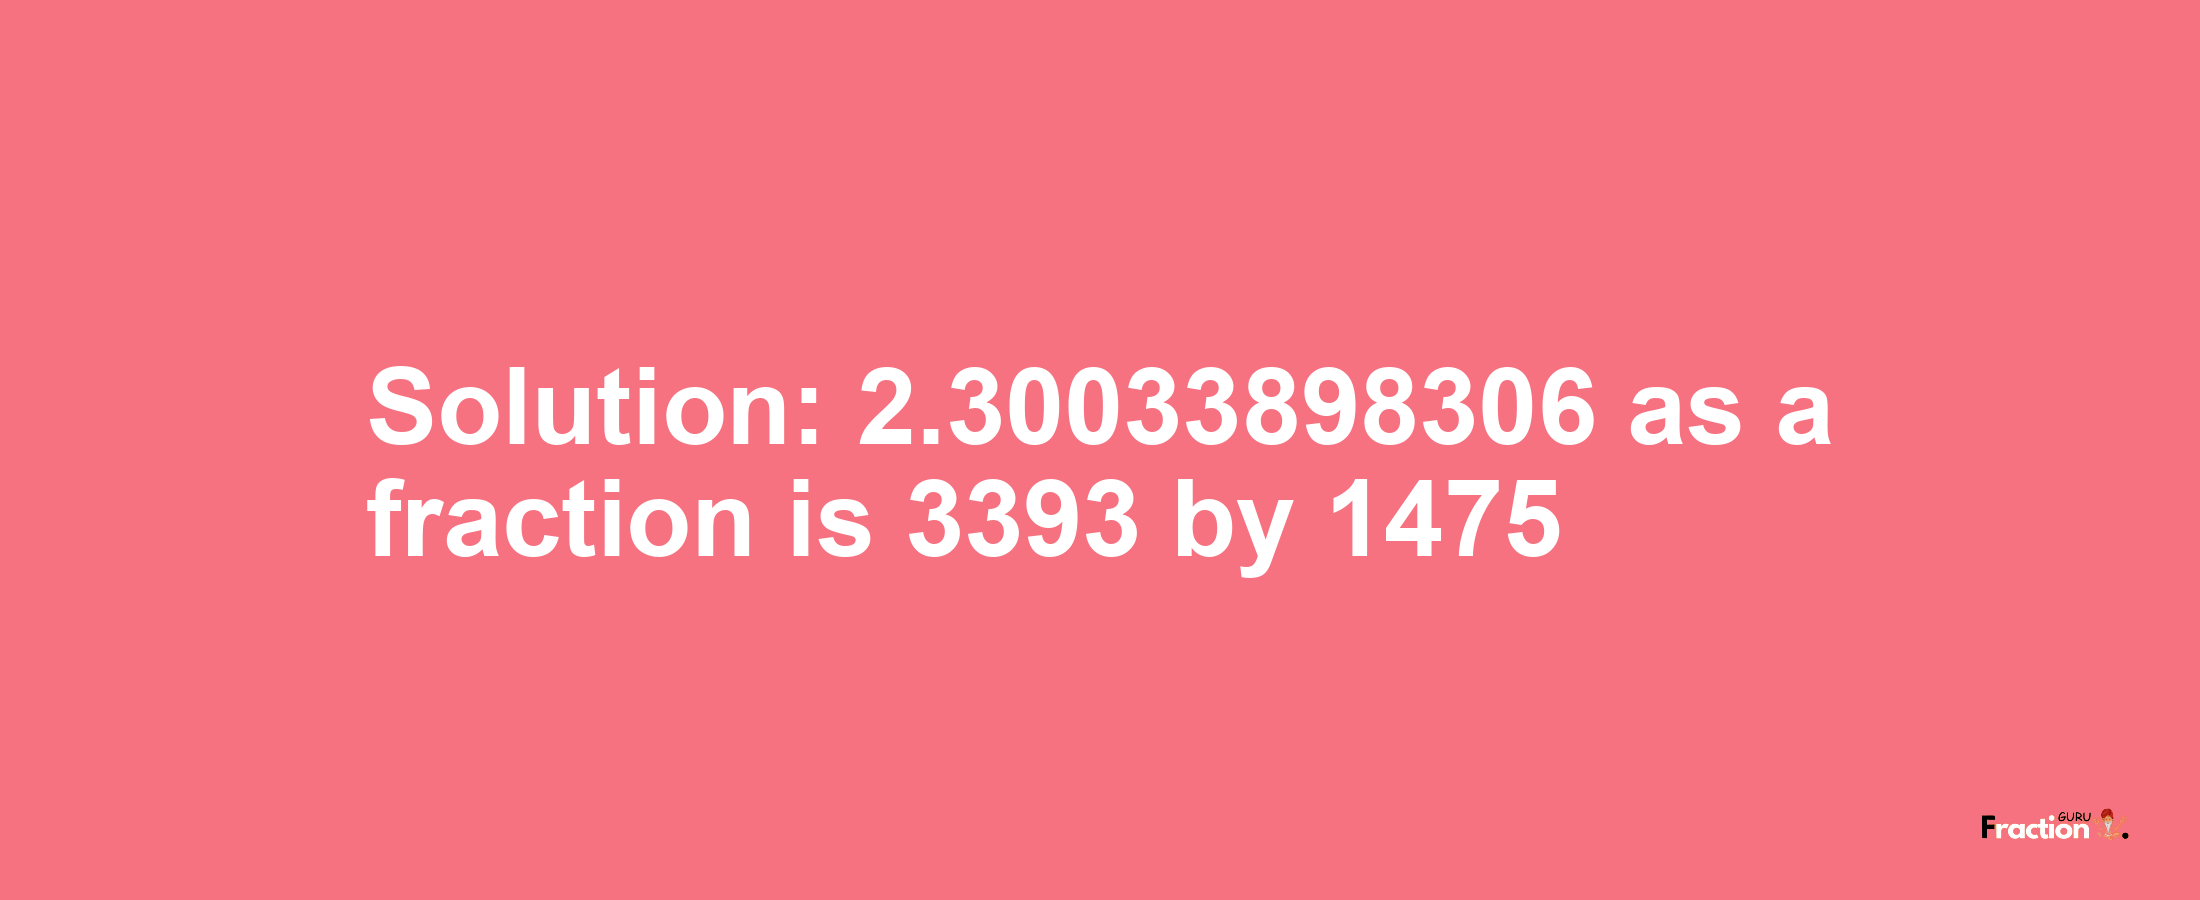 Solution:2.30033898306 as a fraction is 3393/1475